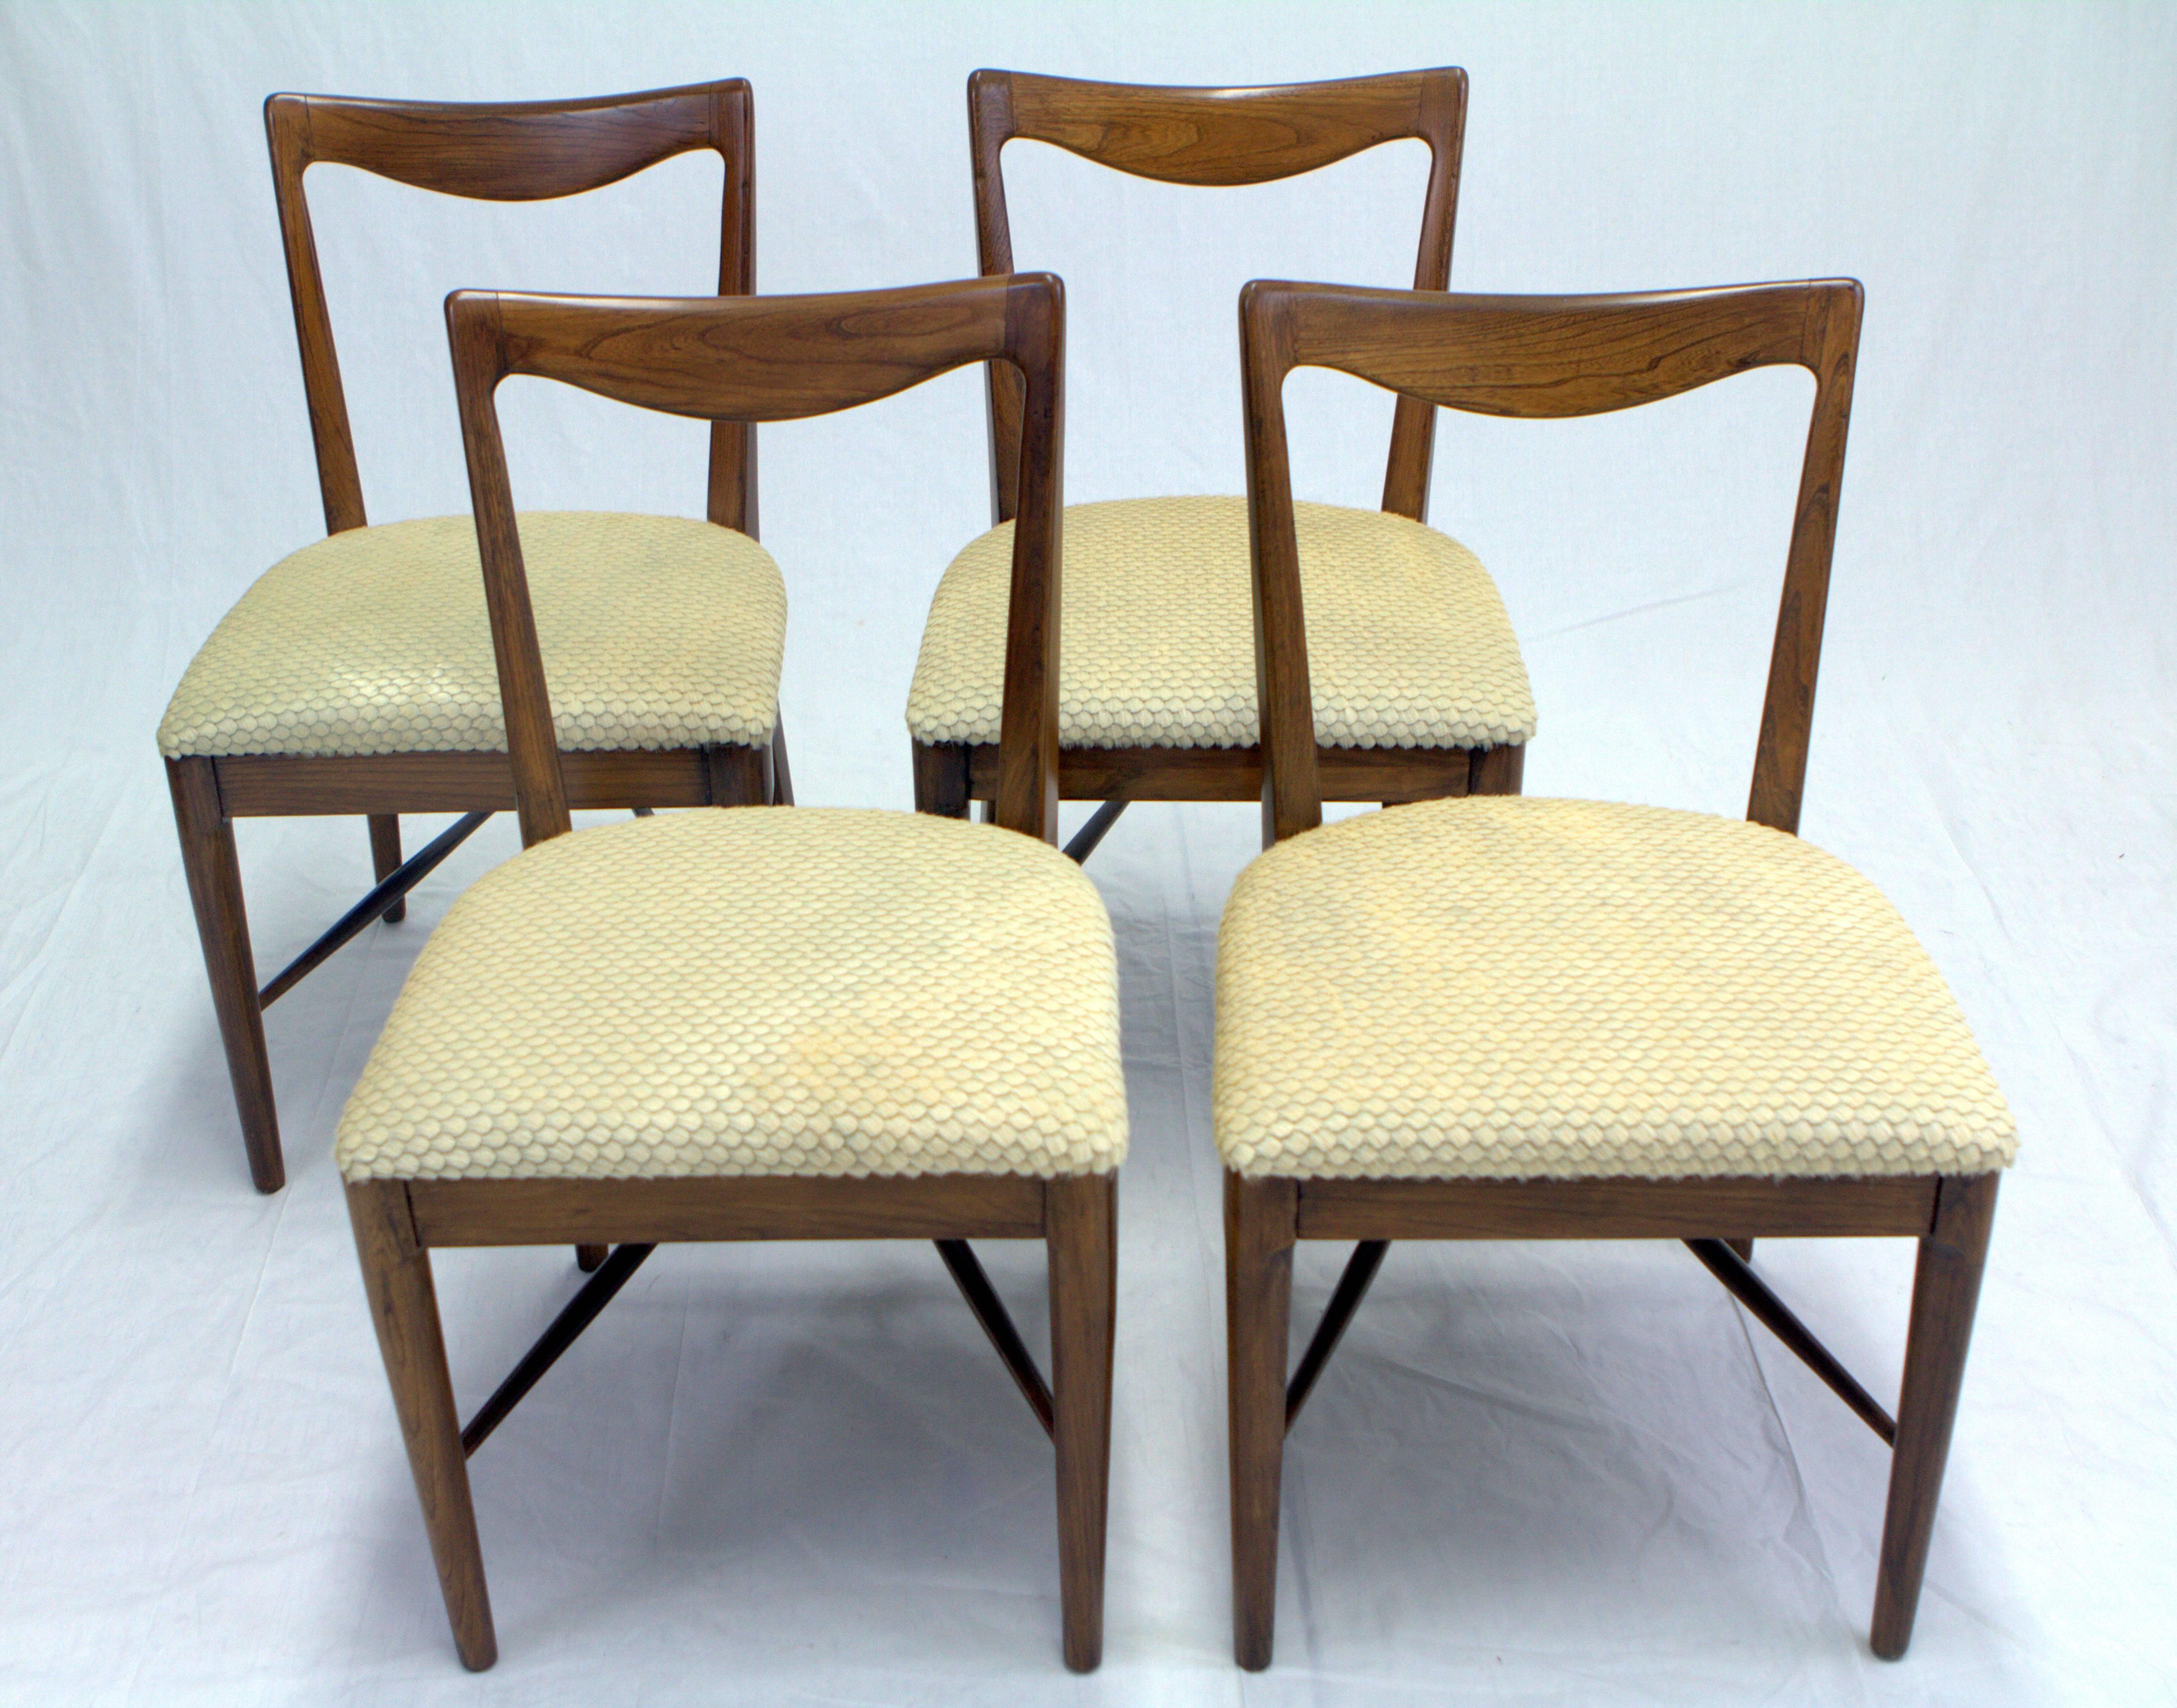 Sculptural set of four Italian walnut dining chairs with laser-cut scalloped hide seats in the style of Paolo Buffa.